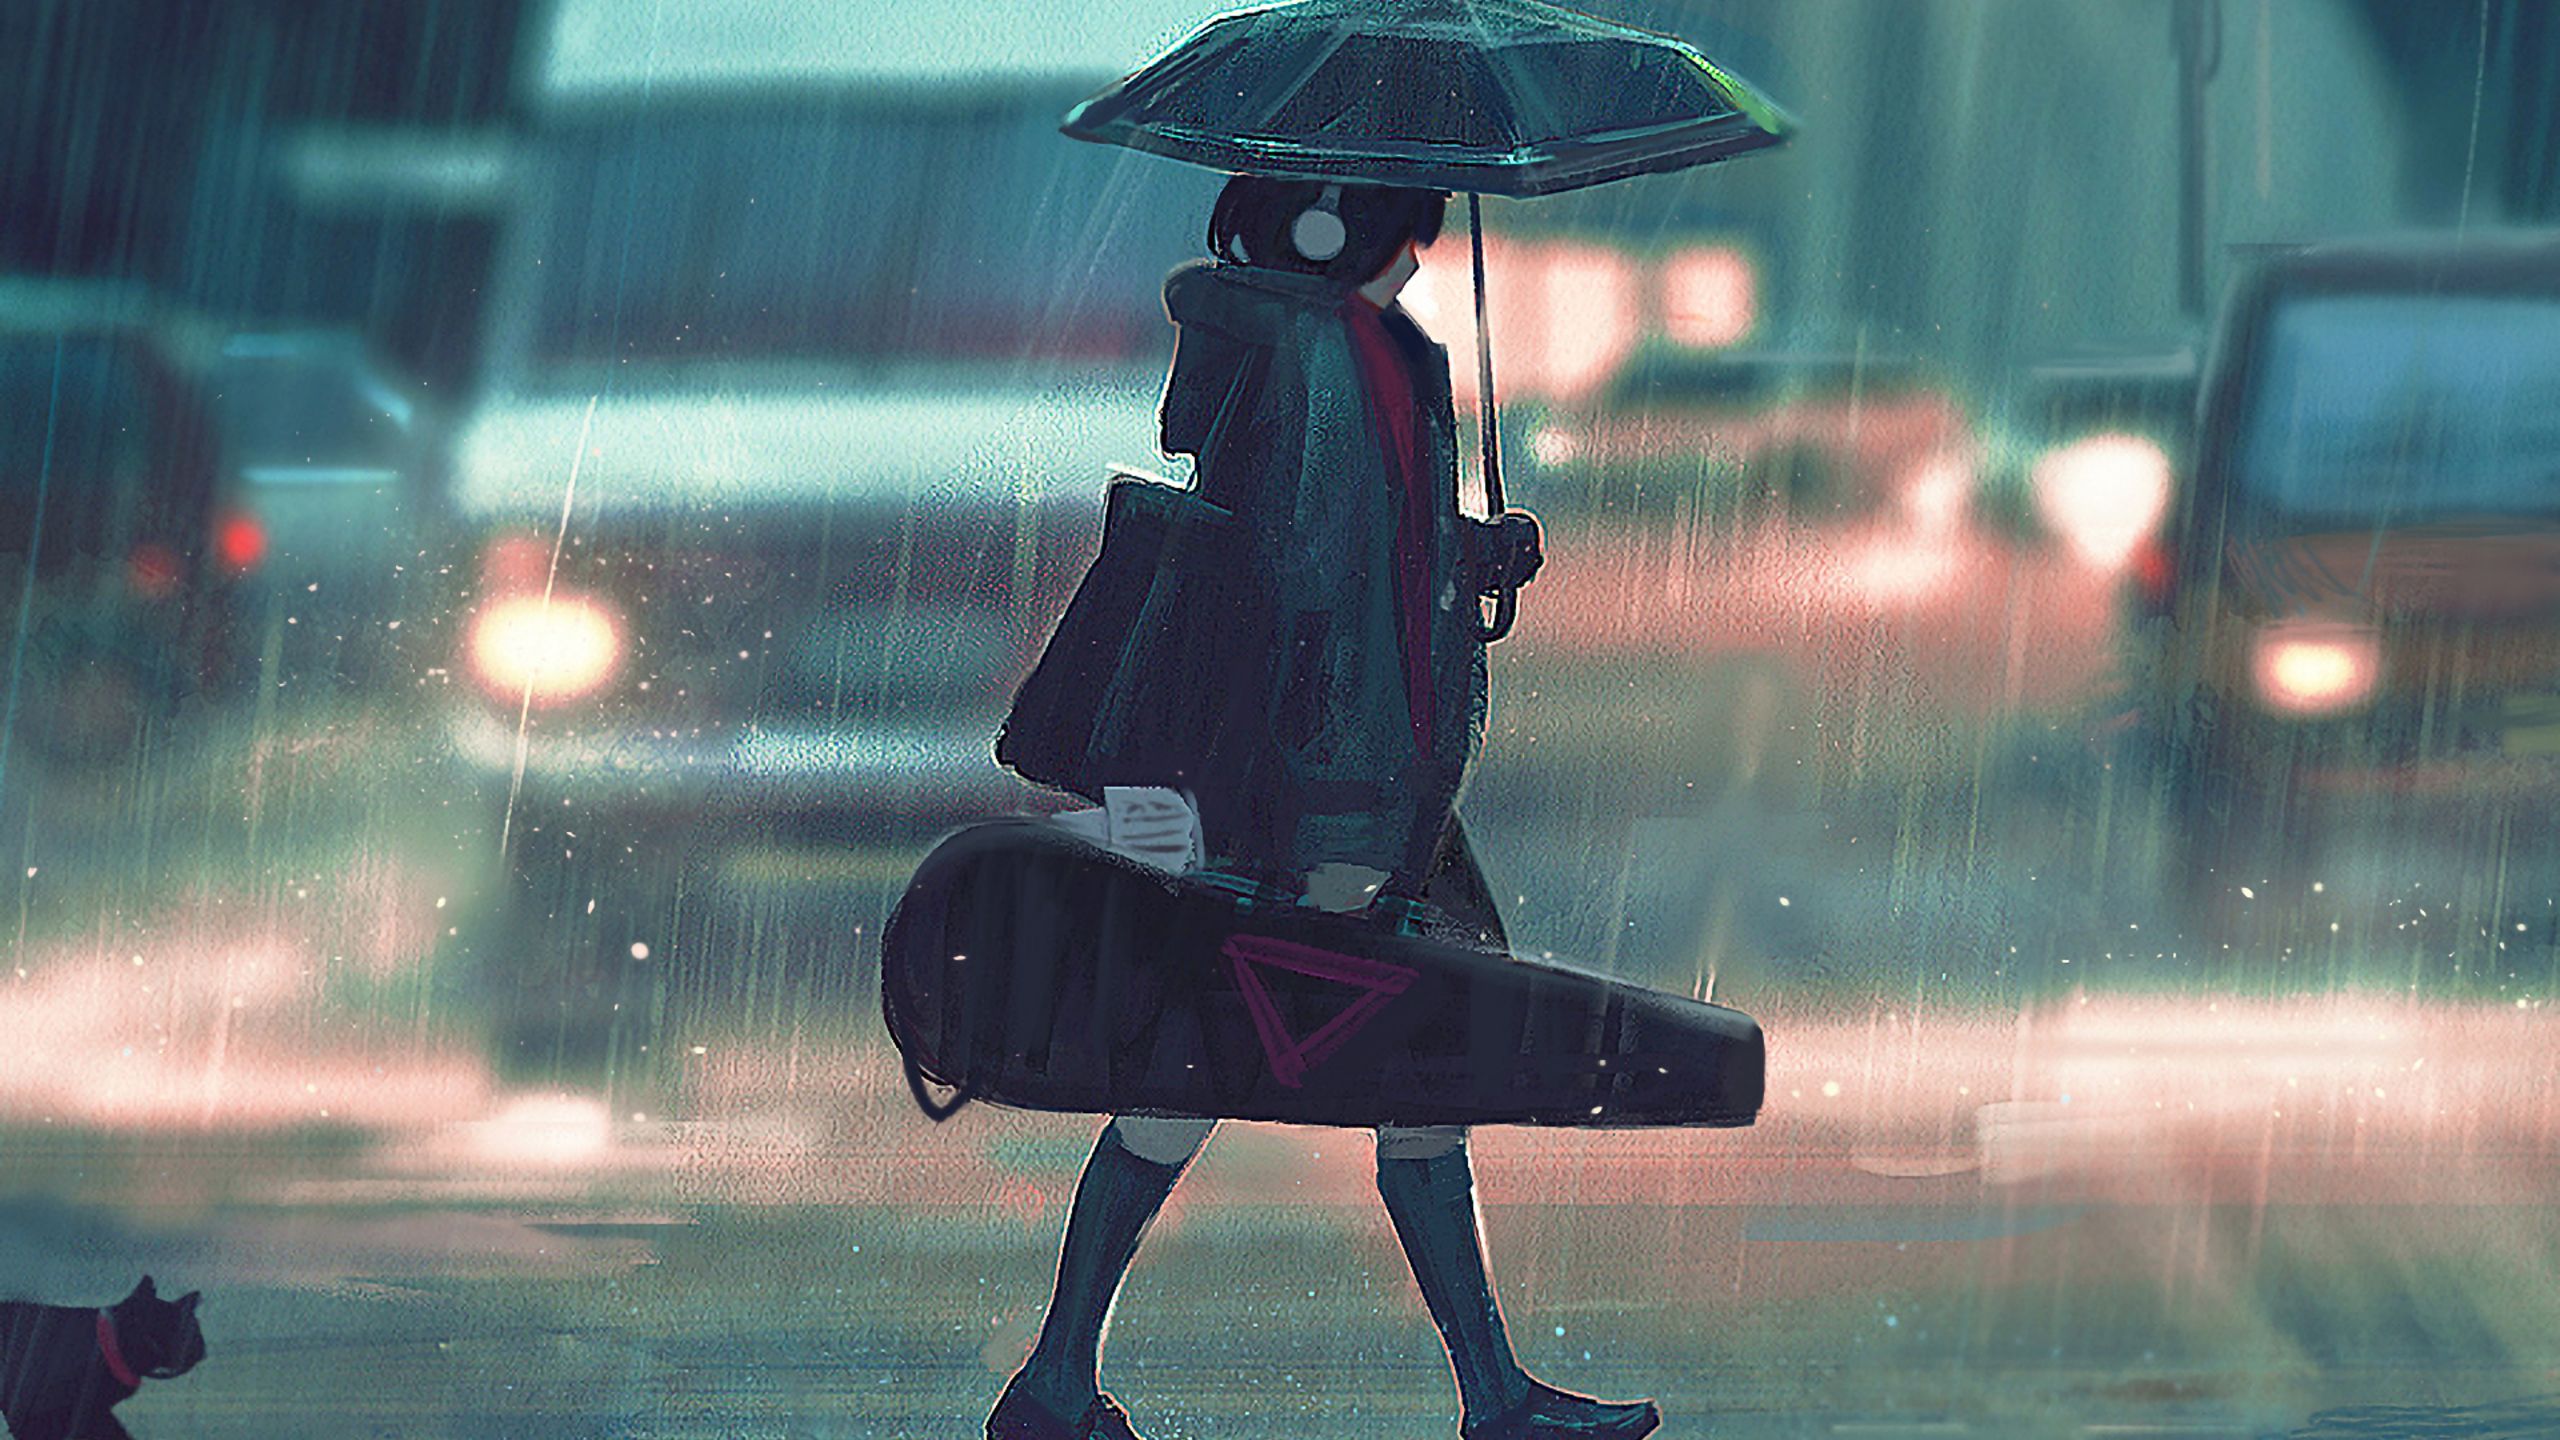 Anime Girl With Guitar Passing Street 1440P Resolution